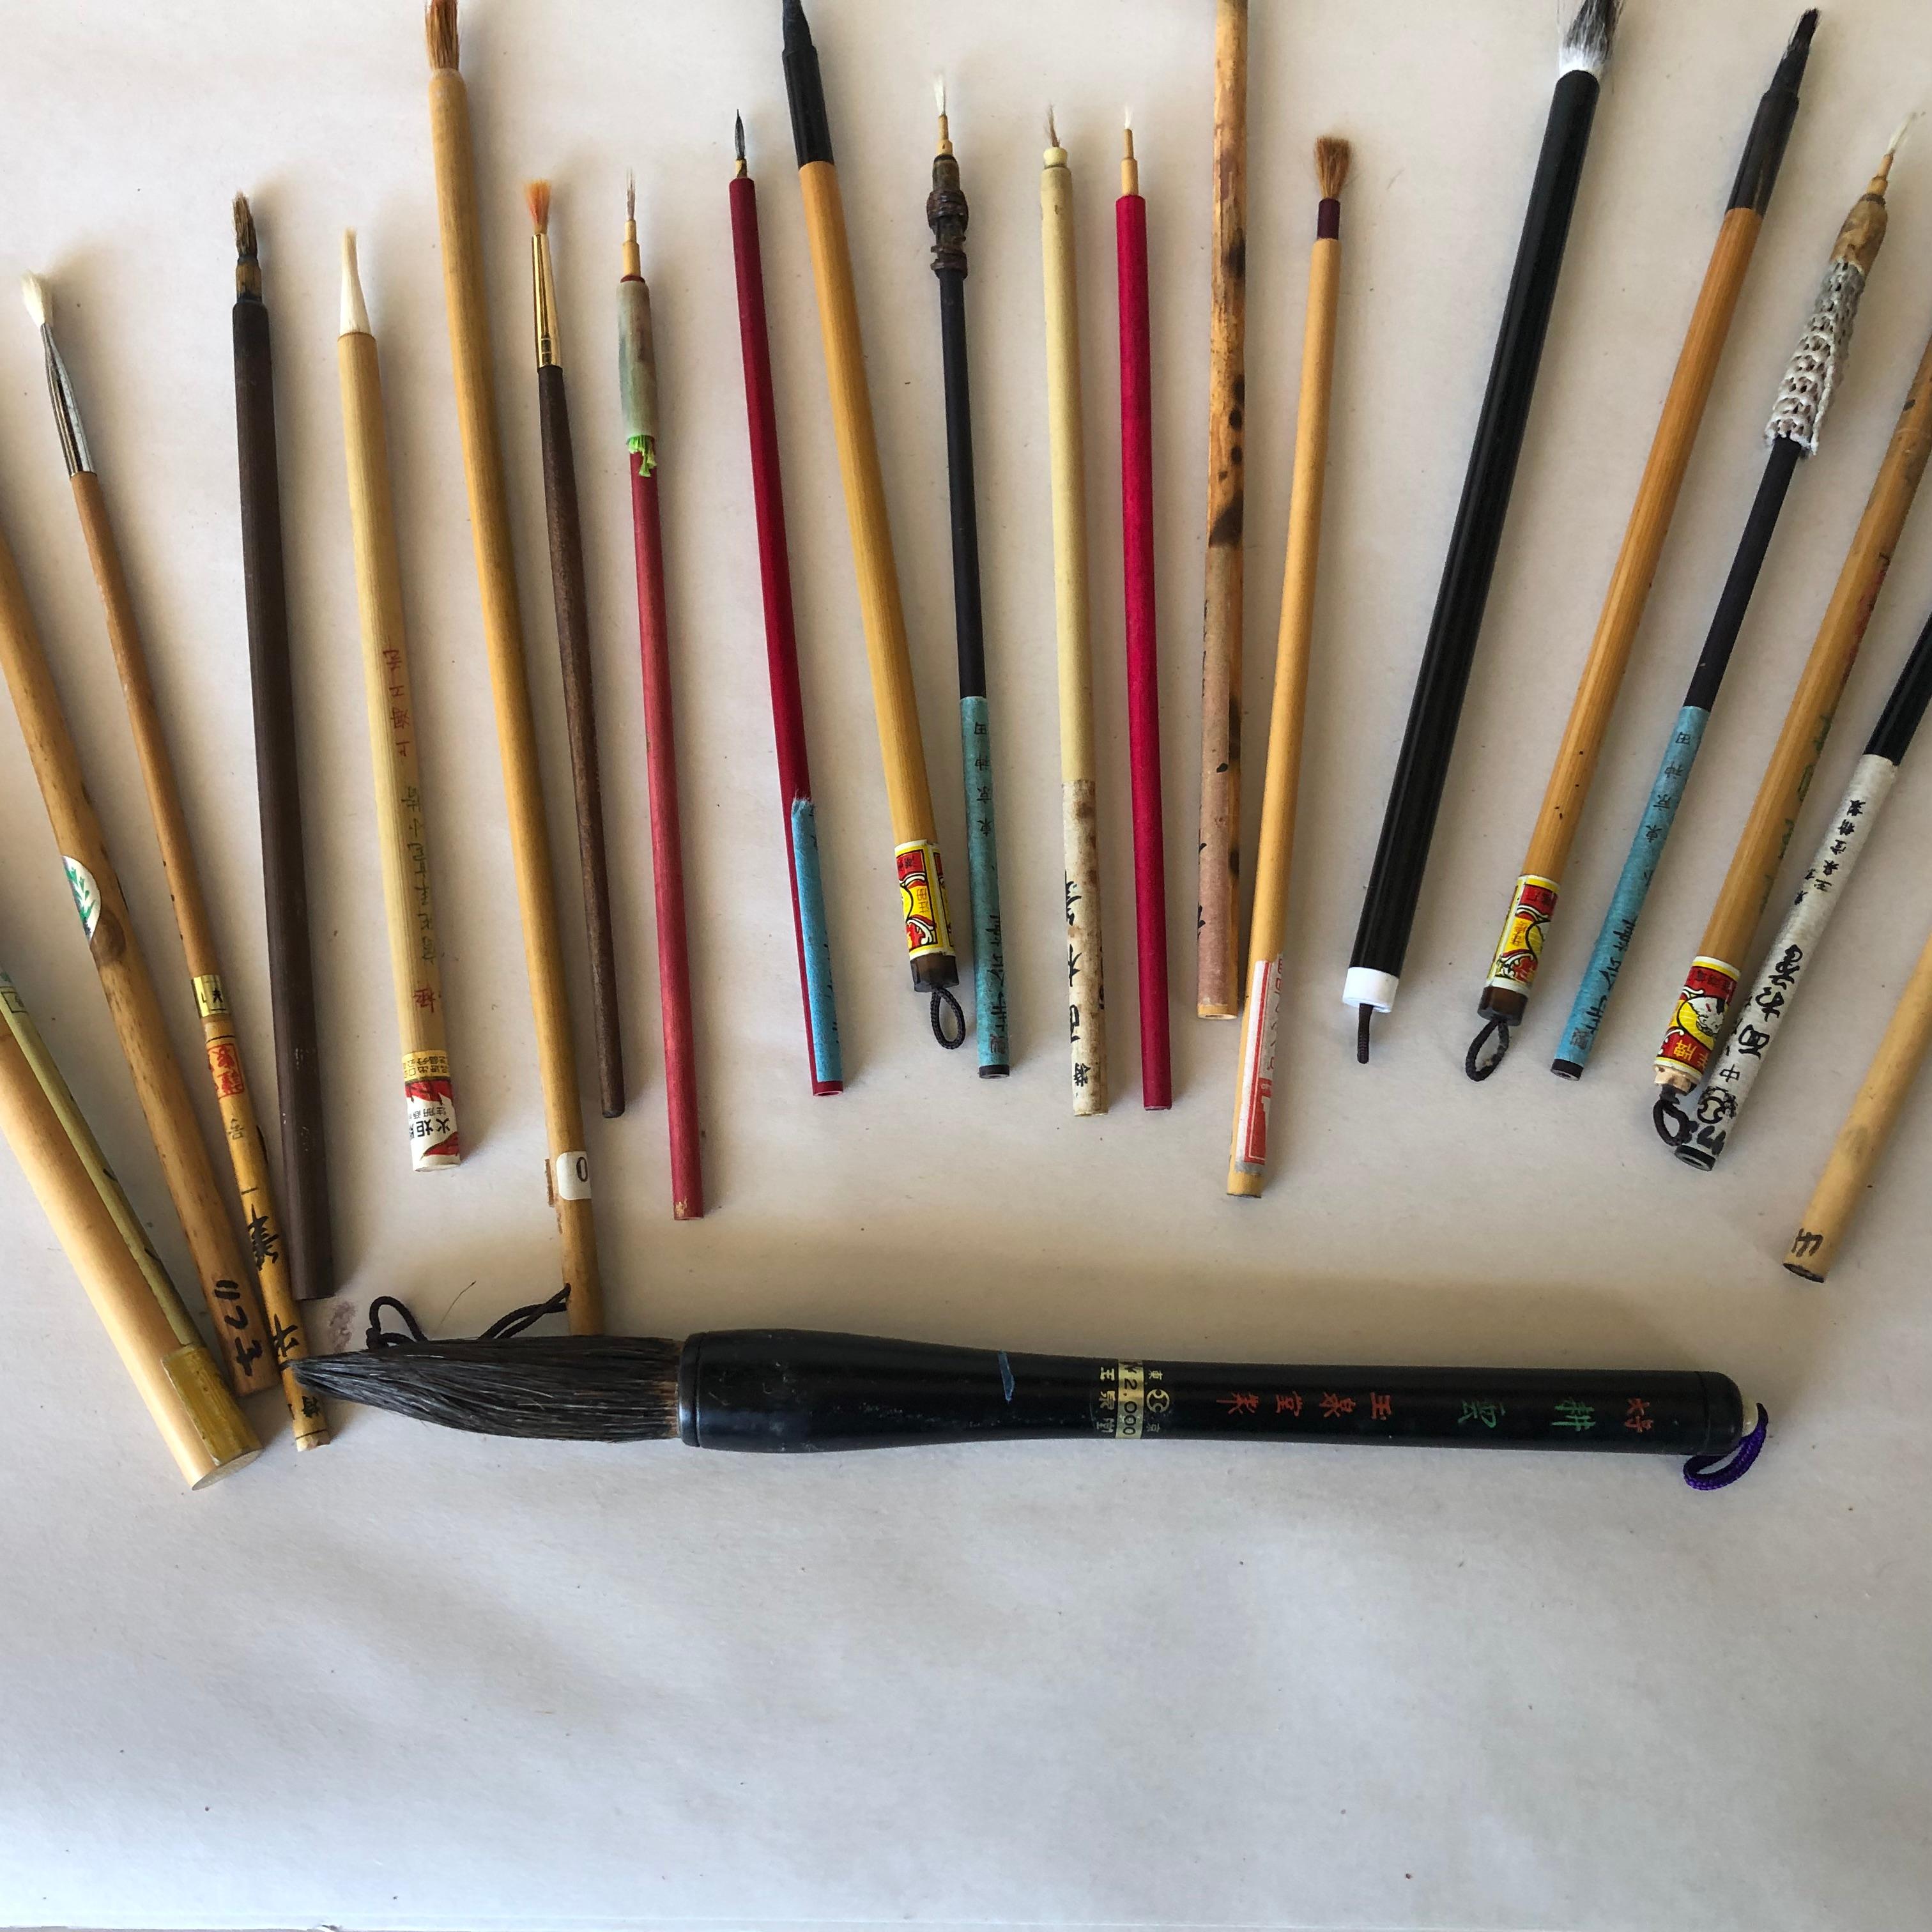 20th Century Artisan's Cache of 20 Old Chinese Paint Calligraphy Bamboo Brushes